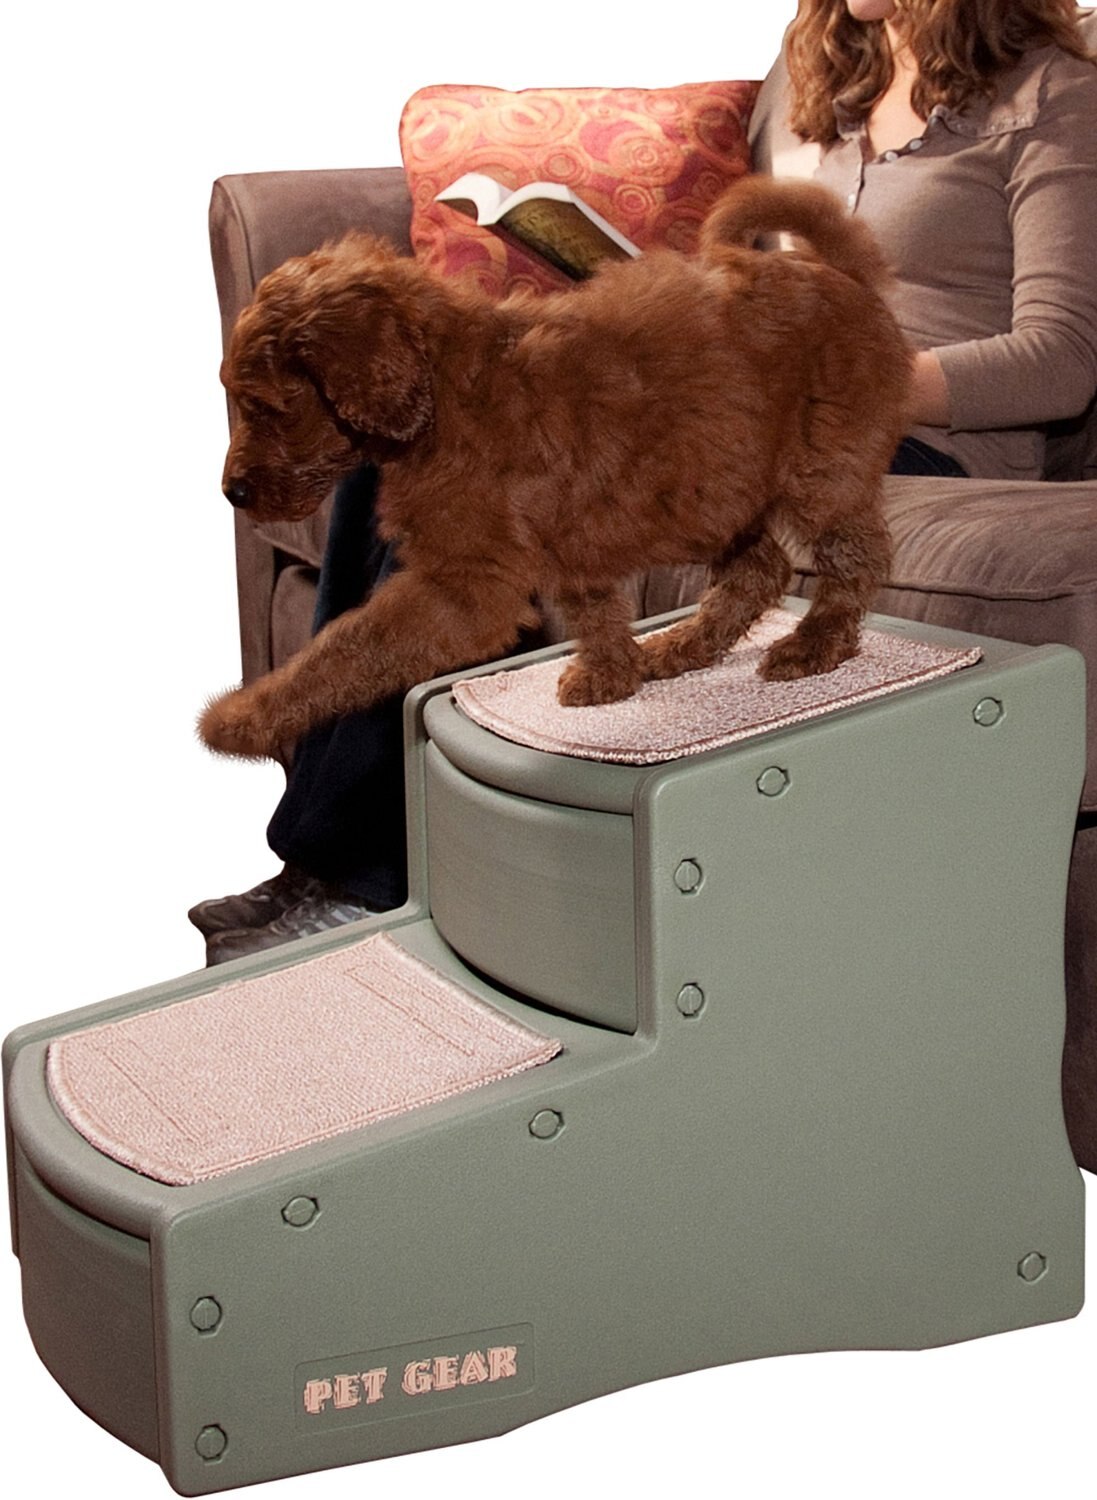 Chocolate Pet Gear Easy Step II Pet Stairs Removable Washable Carpet Tread Portable 2 Step for Cats/Dogs up to 75-pounds 